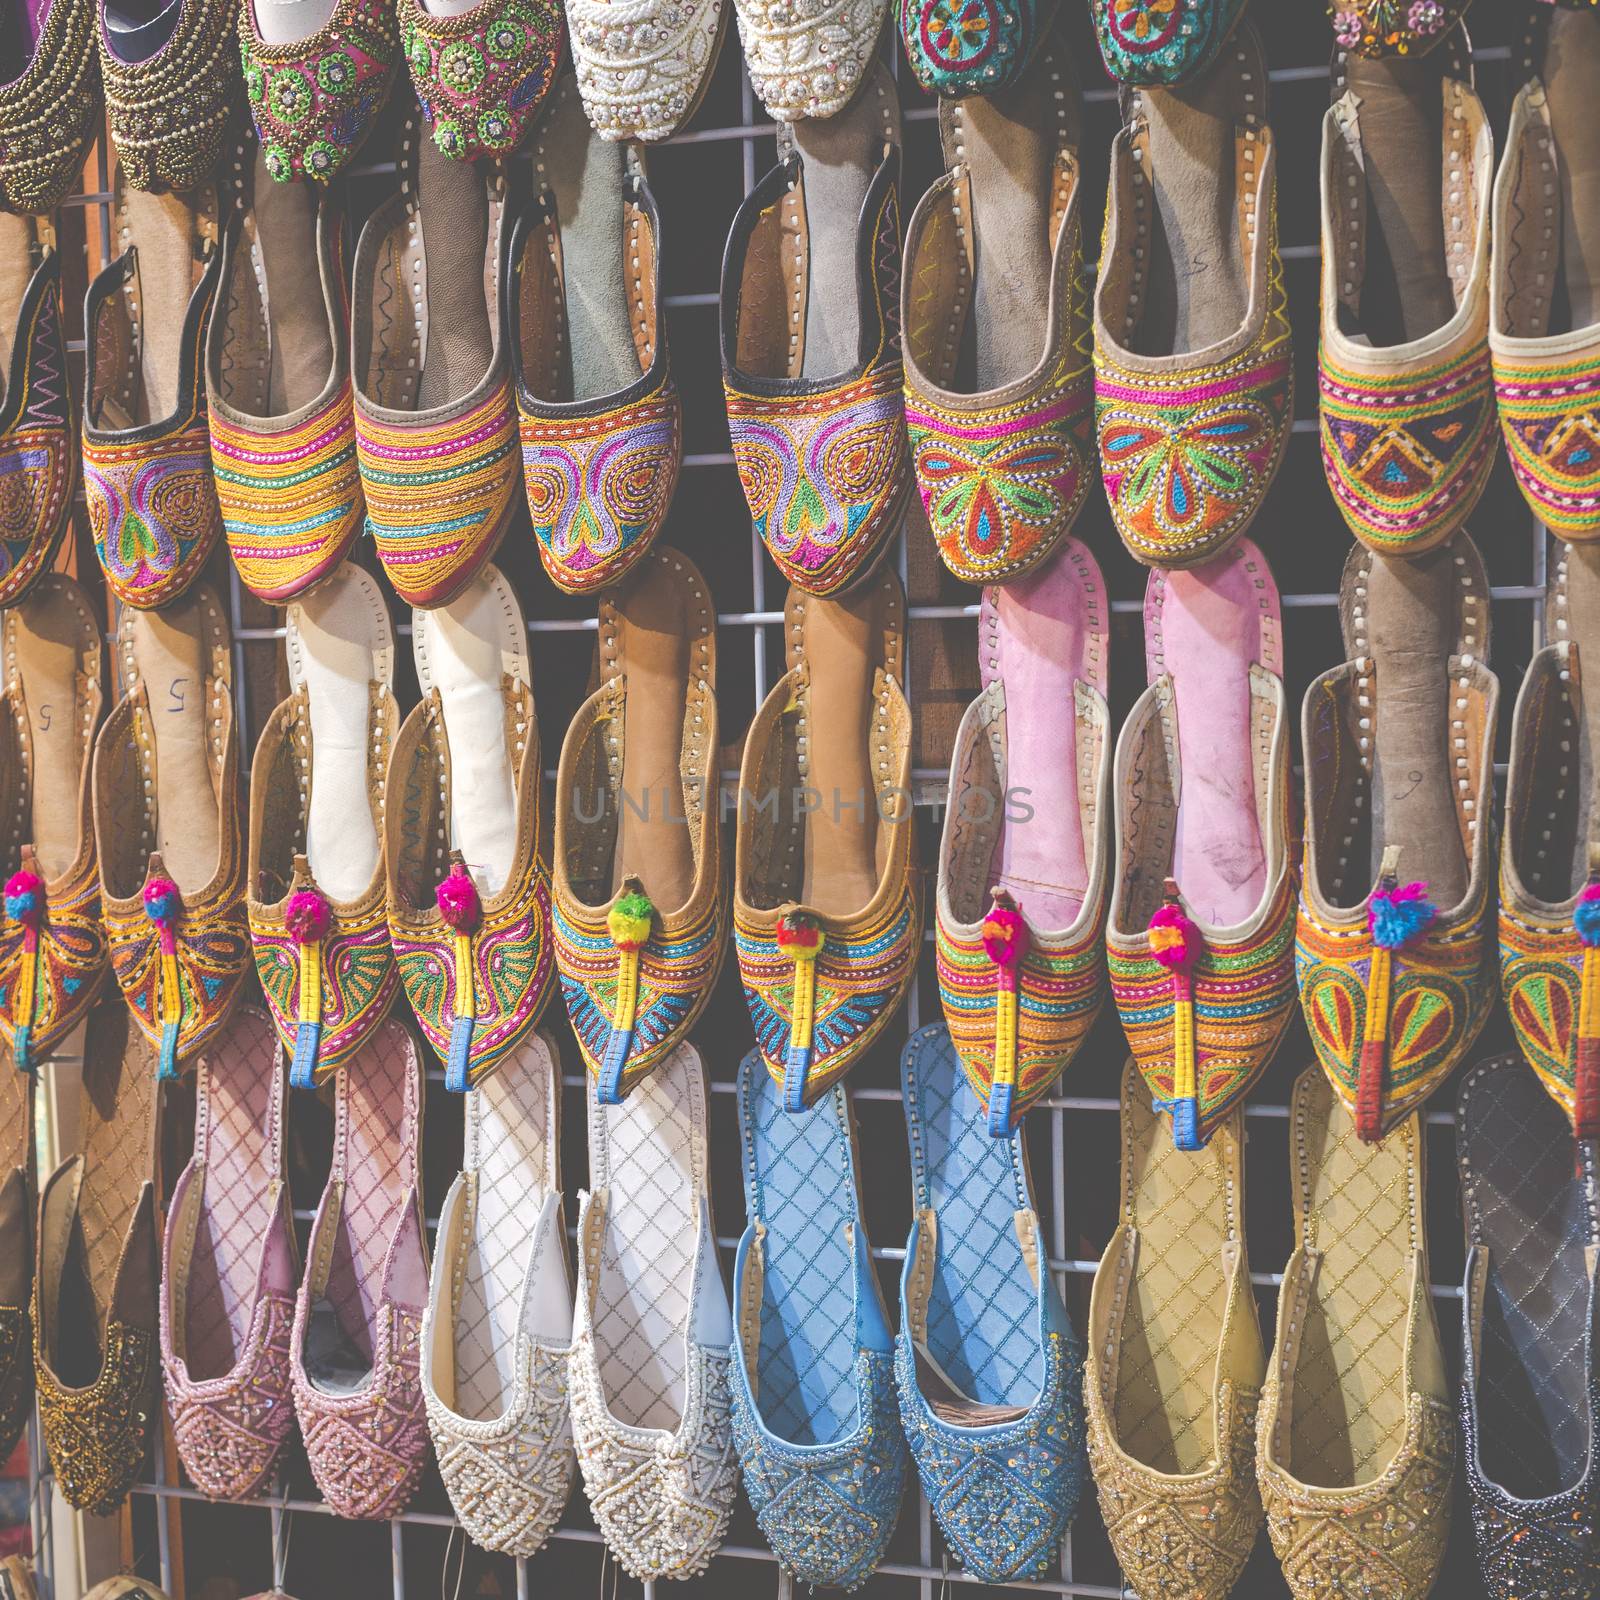 Rows of typically oriental shoes at the market in Dubai